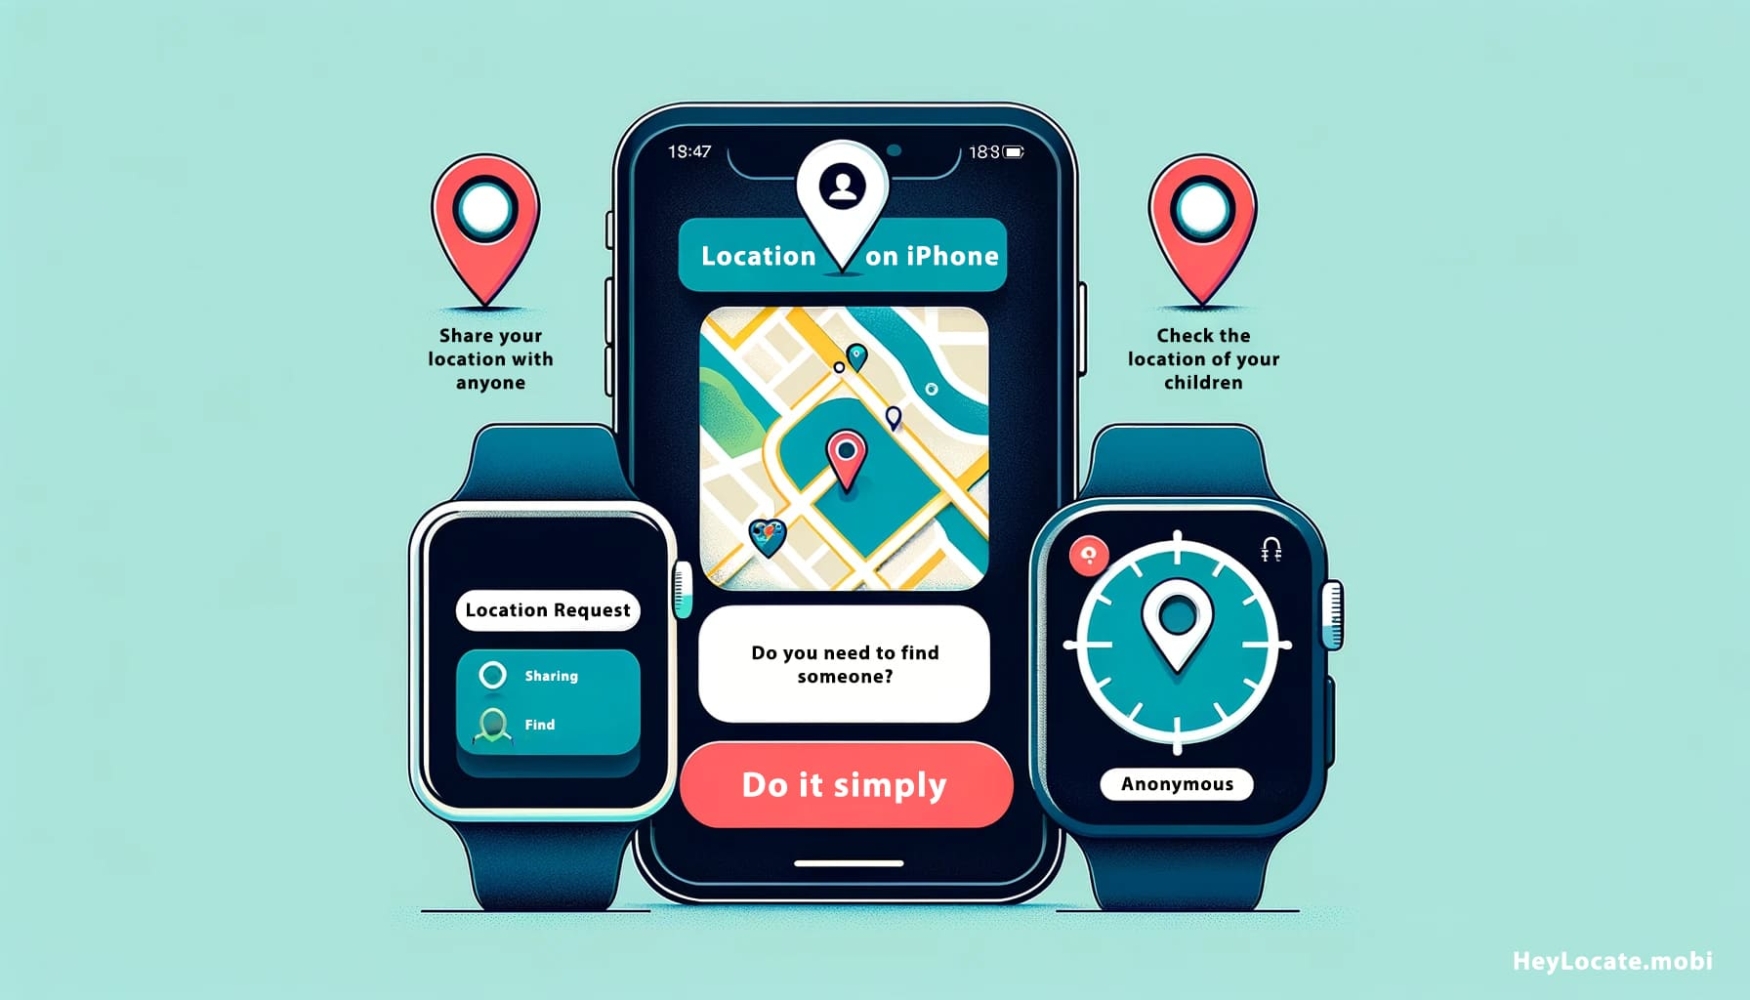 An image for an article explaining how to request location on an iPhone using three methods, including a hidden one. The image feature an iPhone displaying a map with a location request notification, an Apple Watch showing location sharing, and an icon representing a third-party tracker for anonymous tracking. The design informative and modern, illustrating the technology's ability to track locations responsibly.